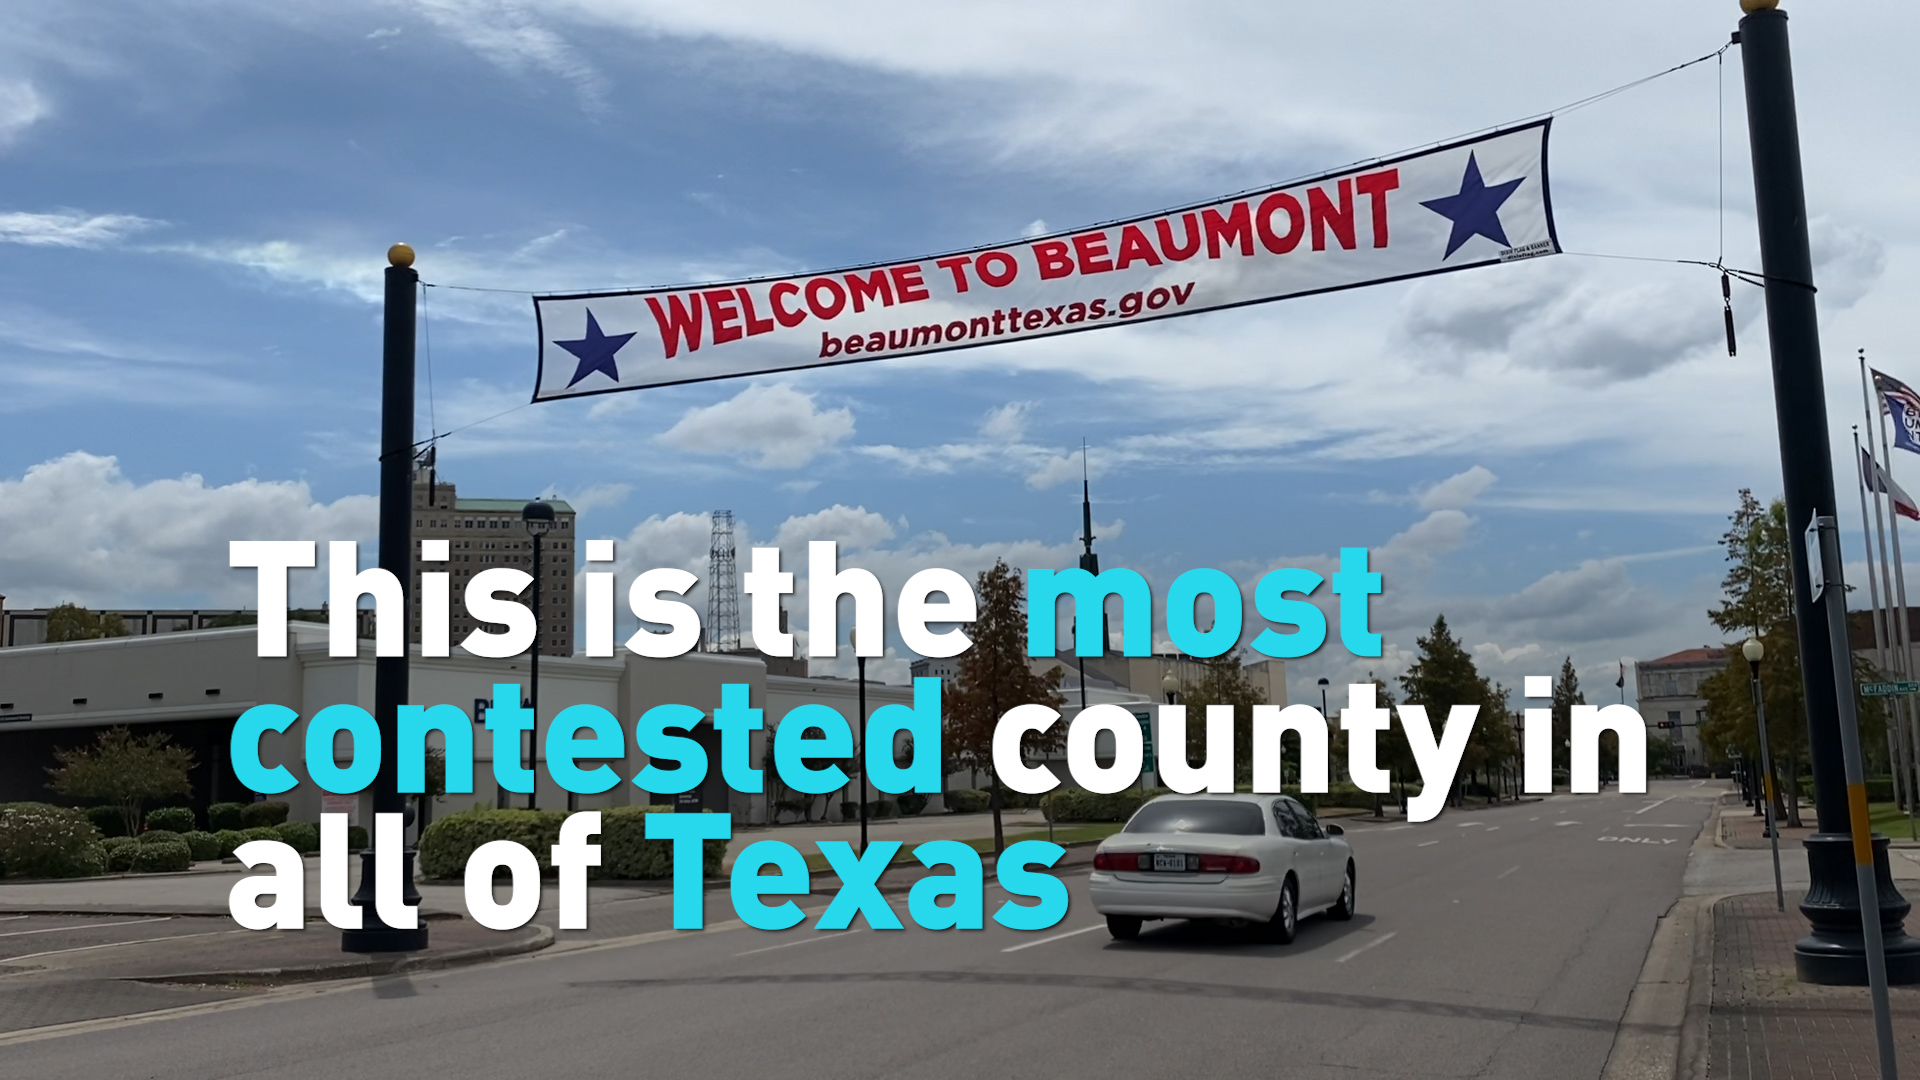 This is the most contested county in all of Texas